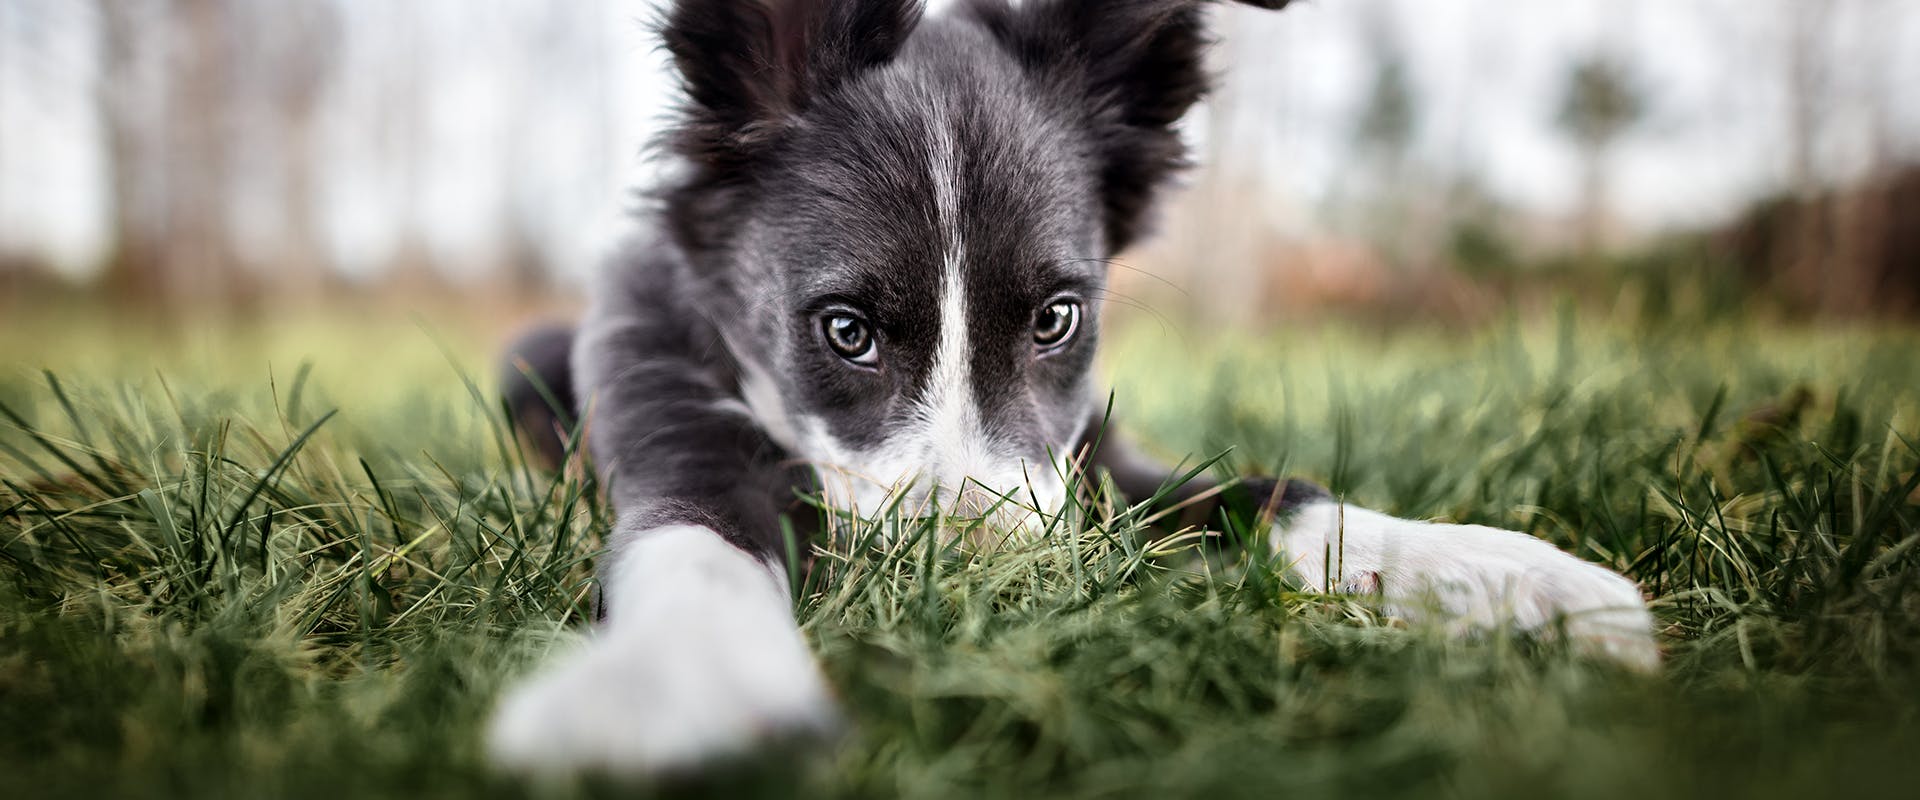 A puppy sitting on a field, its nose buried in long grass